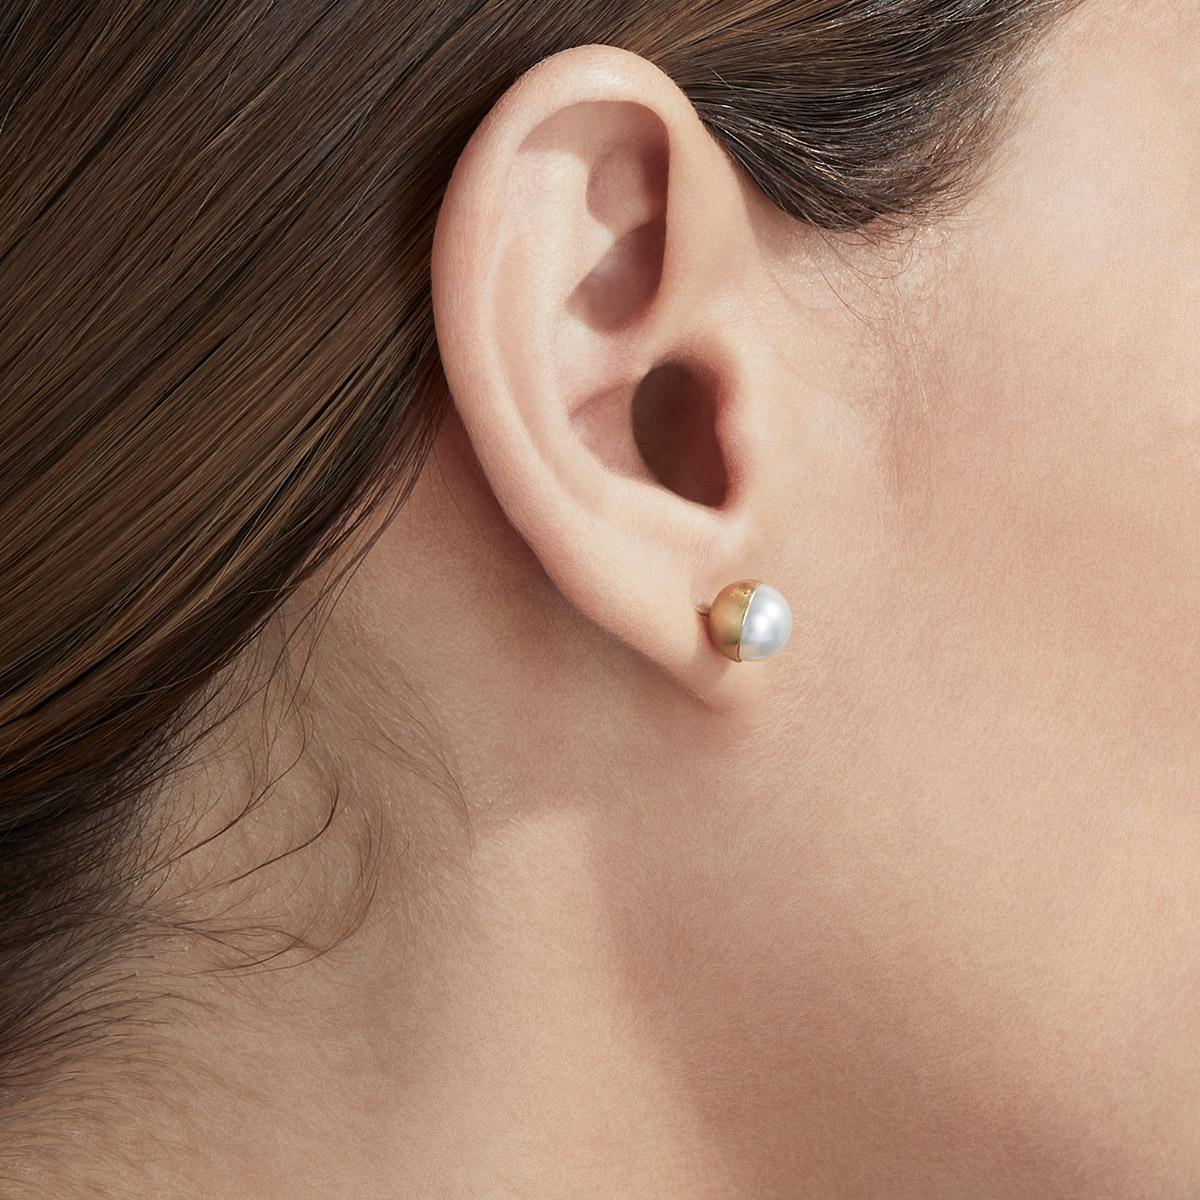 Akoya pearls are encased in a half sphere of gold at 0 and 45 degree angles and placed on a post. Each comes with an 18 karat yellow gold earring back. 

Post length: 11mm
Earring back length: 7mm
Akoya pearl: 7mm
This item is sold as a pair.
This